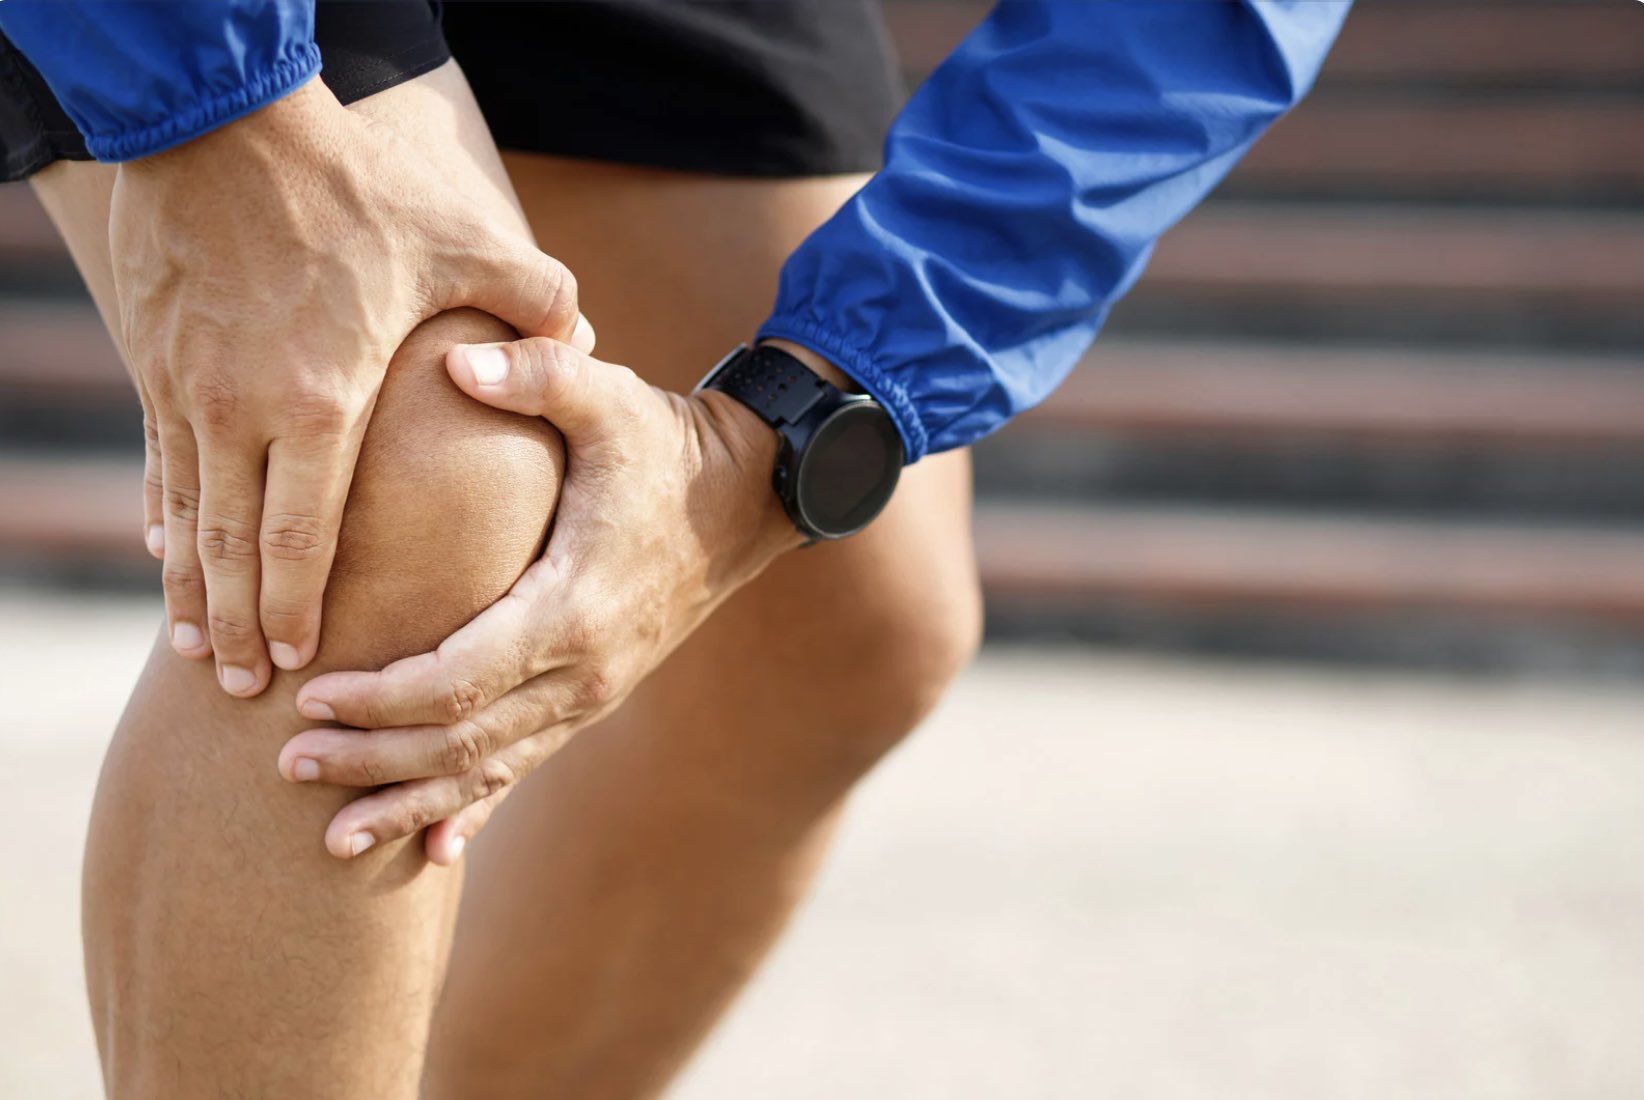 8 Signs You Might Need a Total Knee Replacement: Is it Right for You?